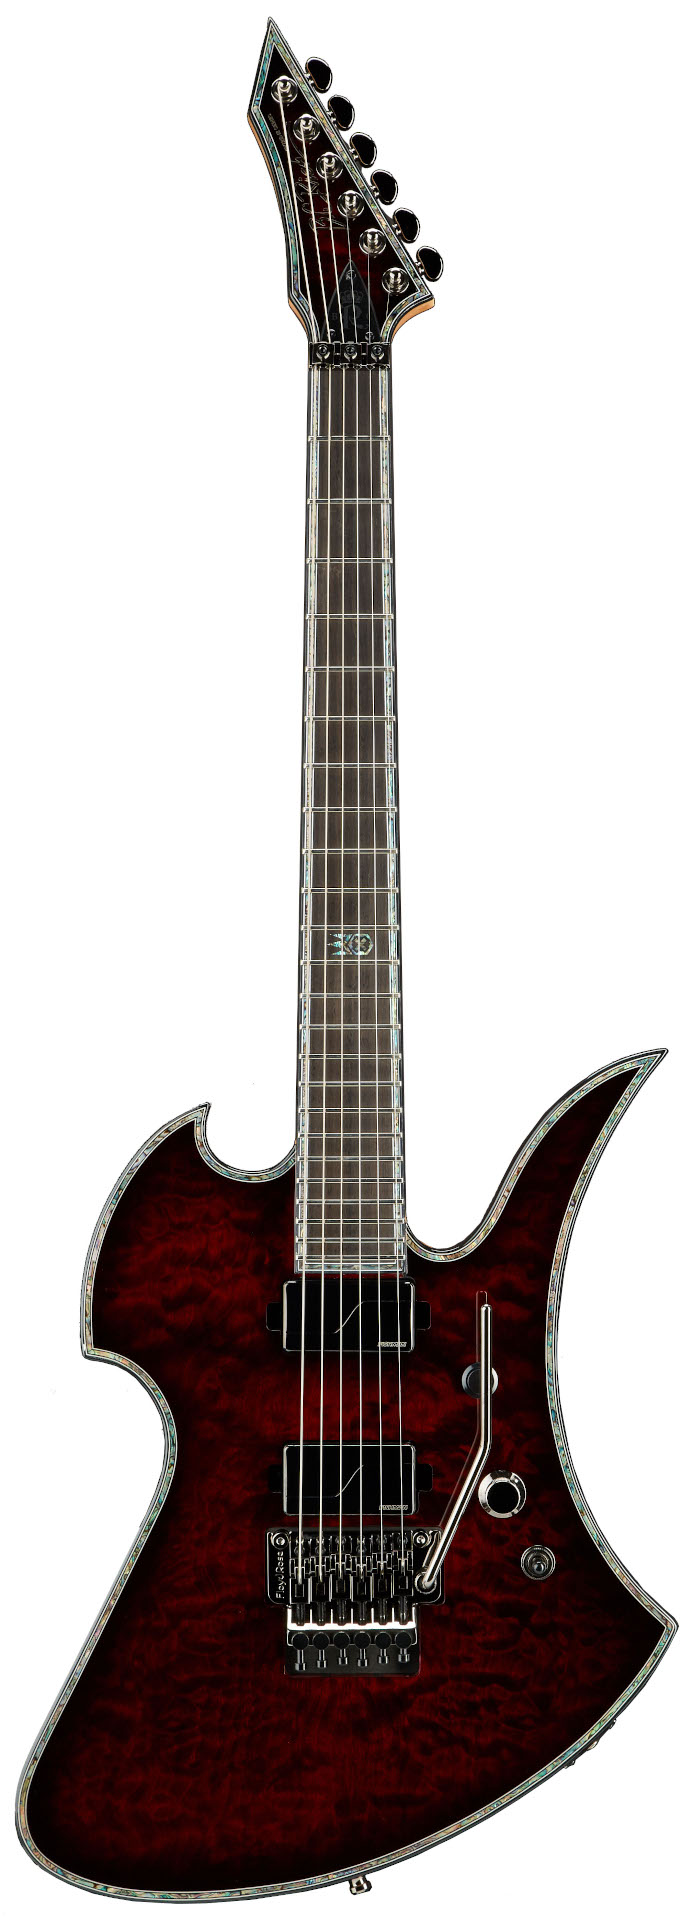 B.C. Rich Mockingbird Extreme Exotic with Floyd Rose - Quilted Maple Top, Black Cherry